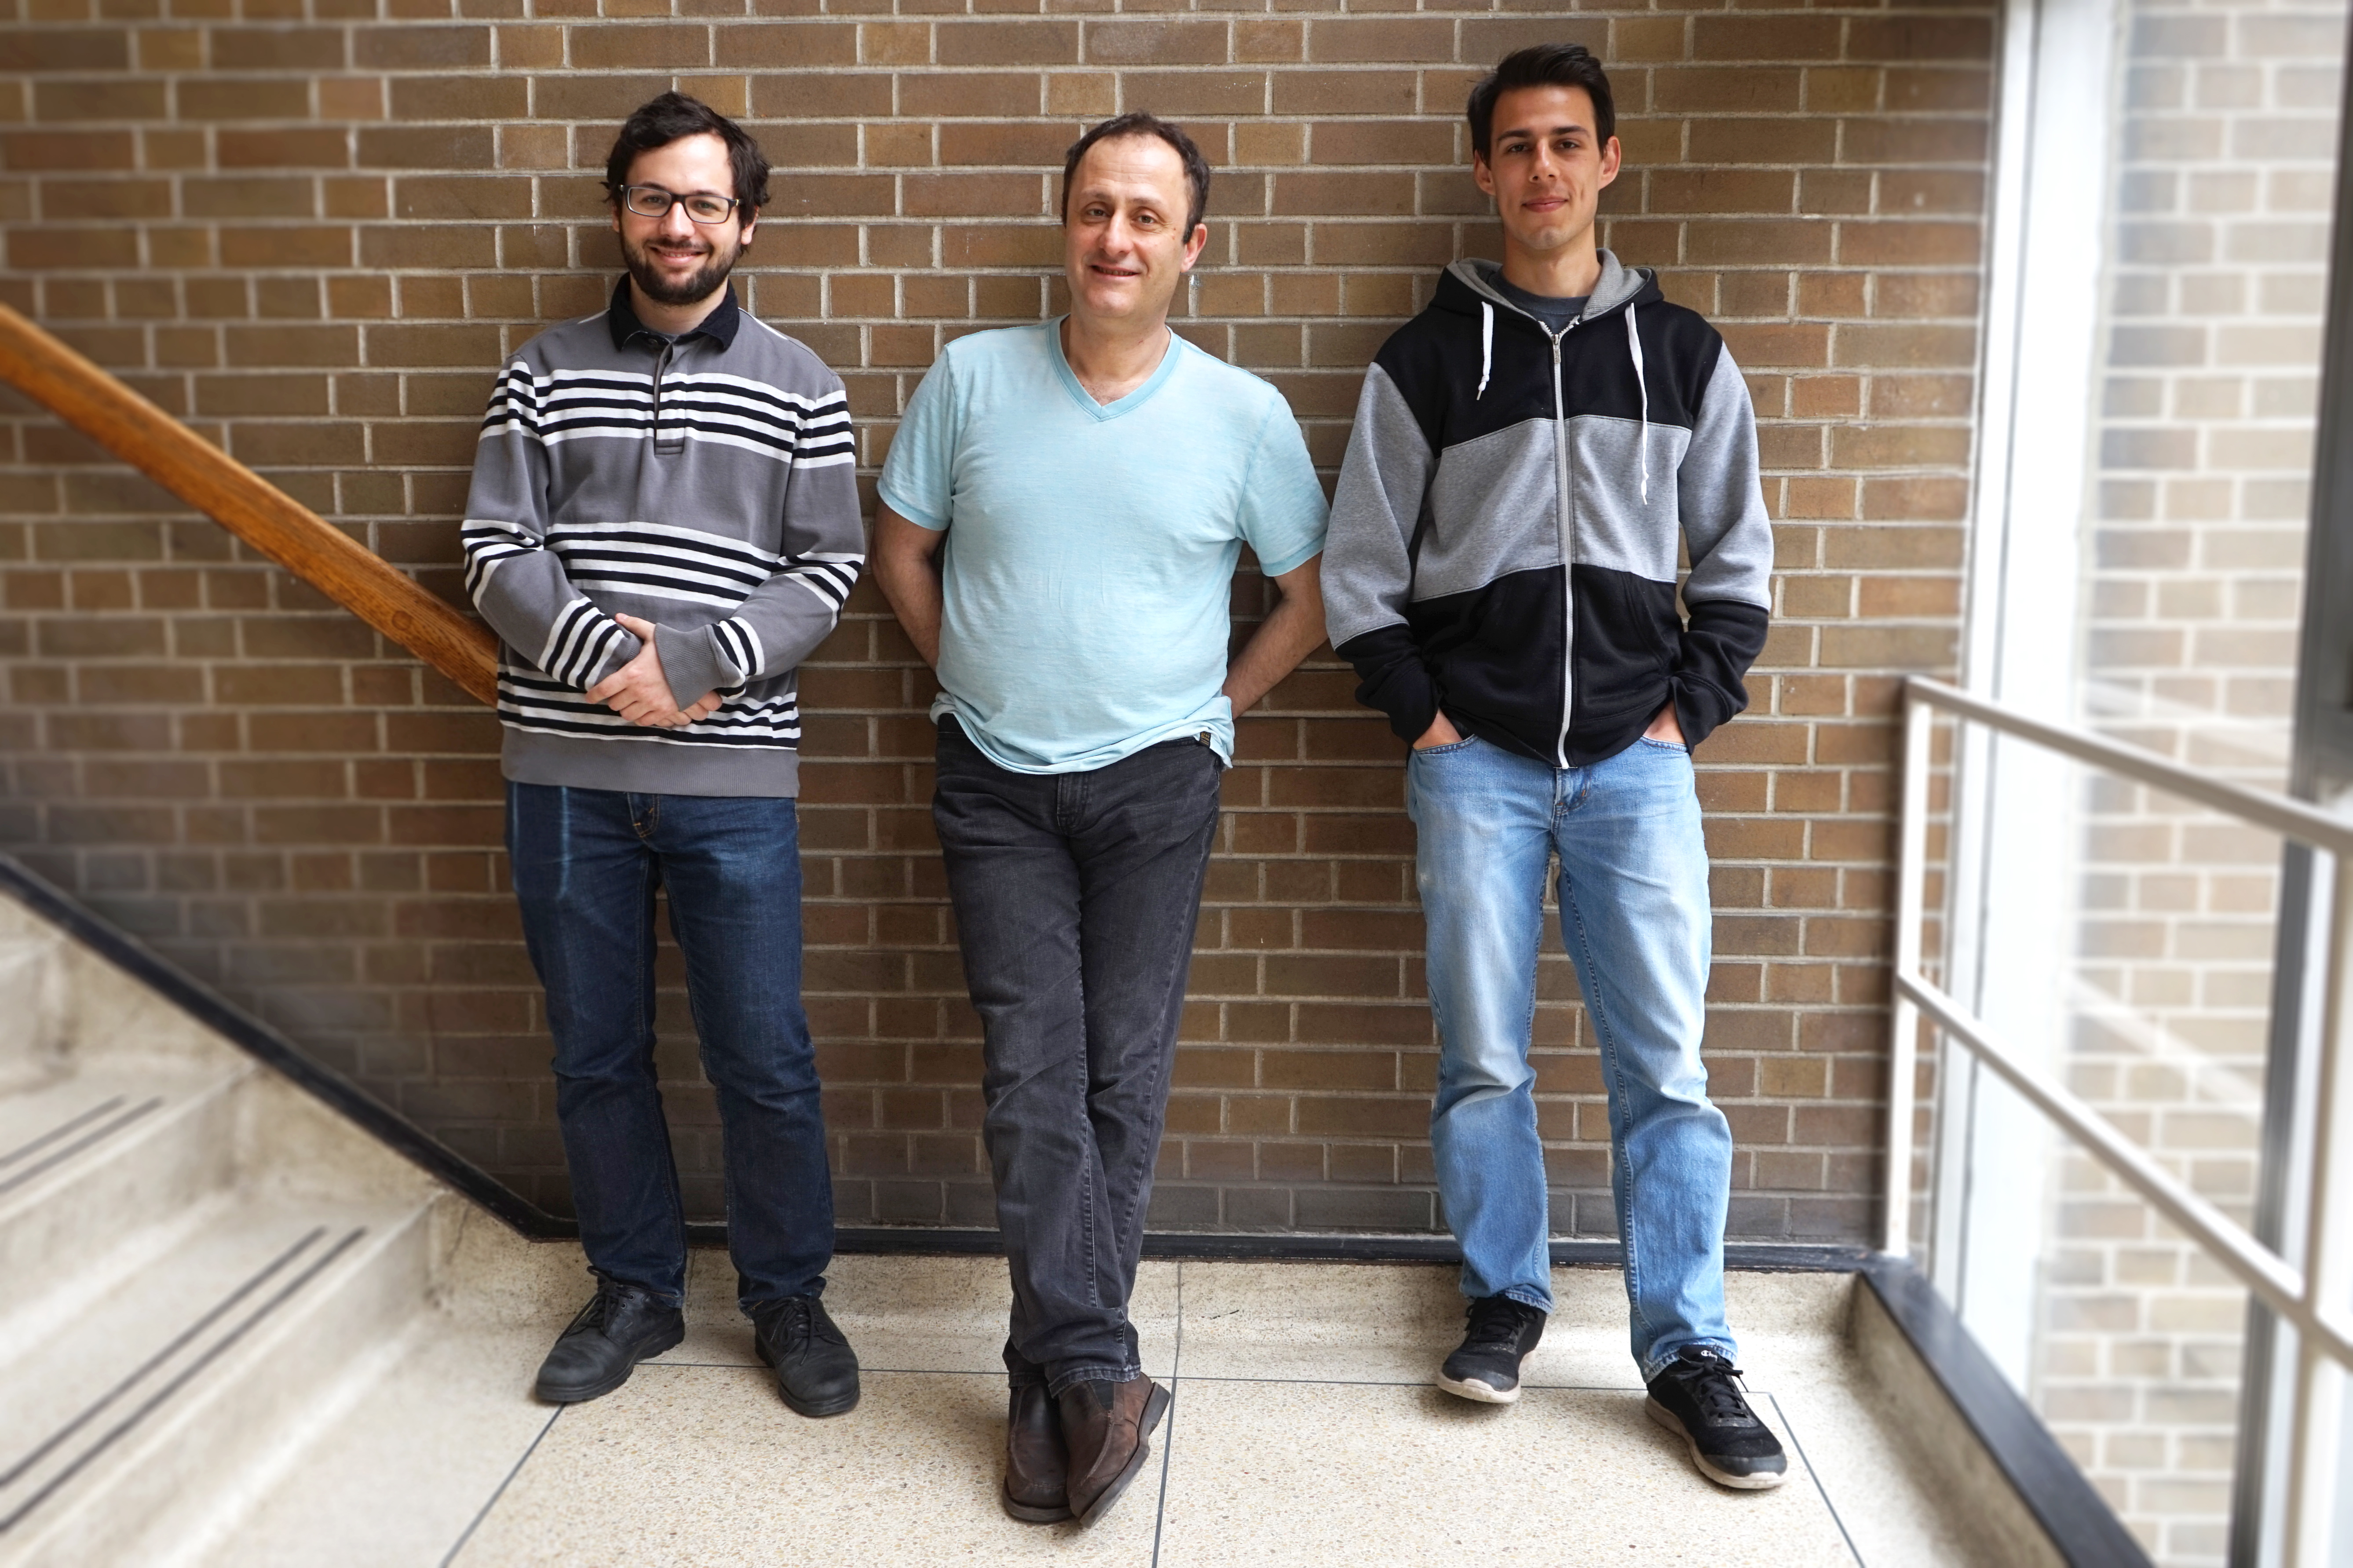 Professor Andreas Veneris (centre) and graduate students Ryan Berryhill (left) and Neil Veira (right) are part of a multidisciplinary group working on blockchain research at the University of Toronto.